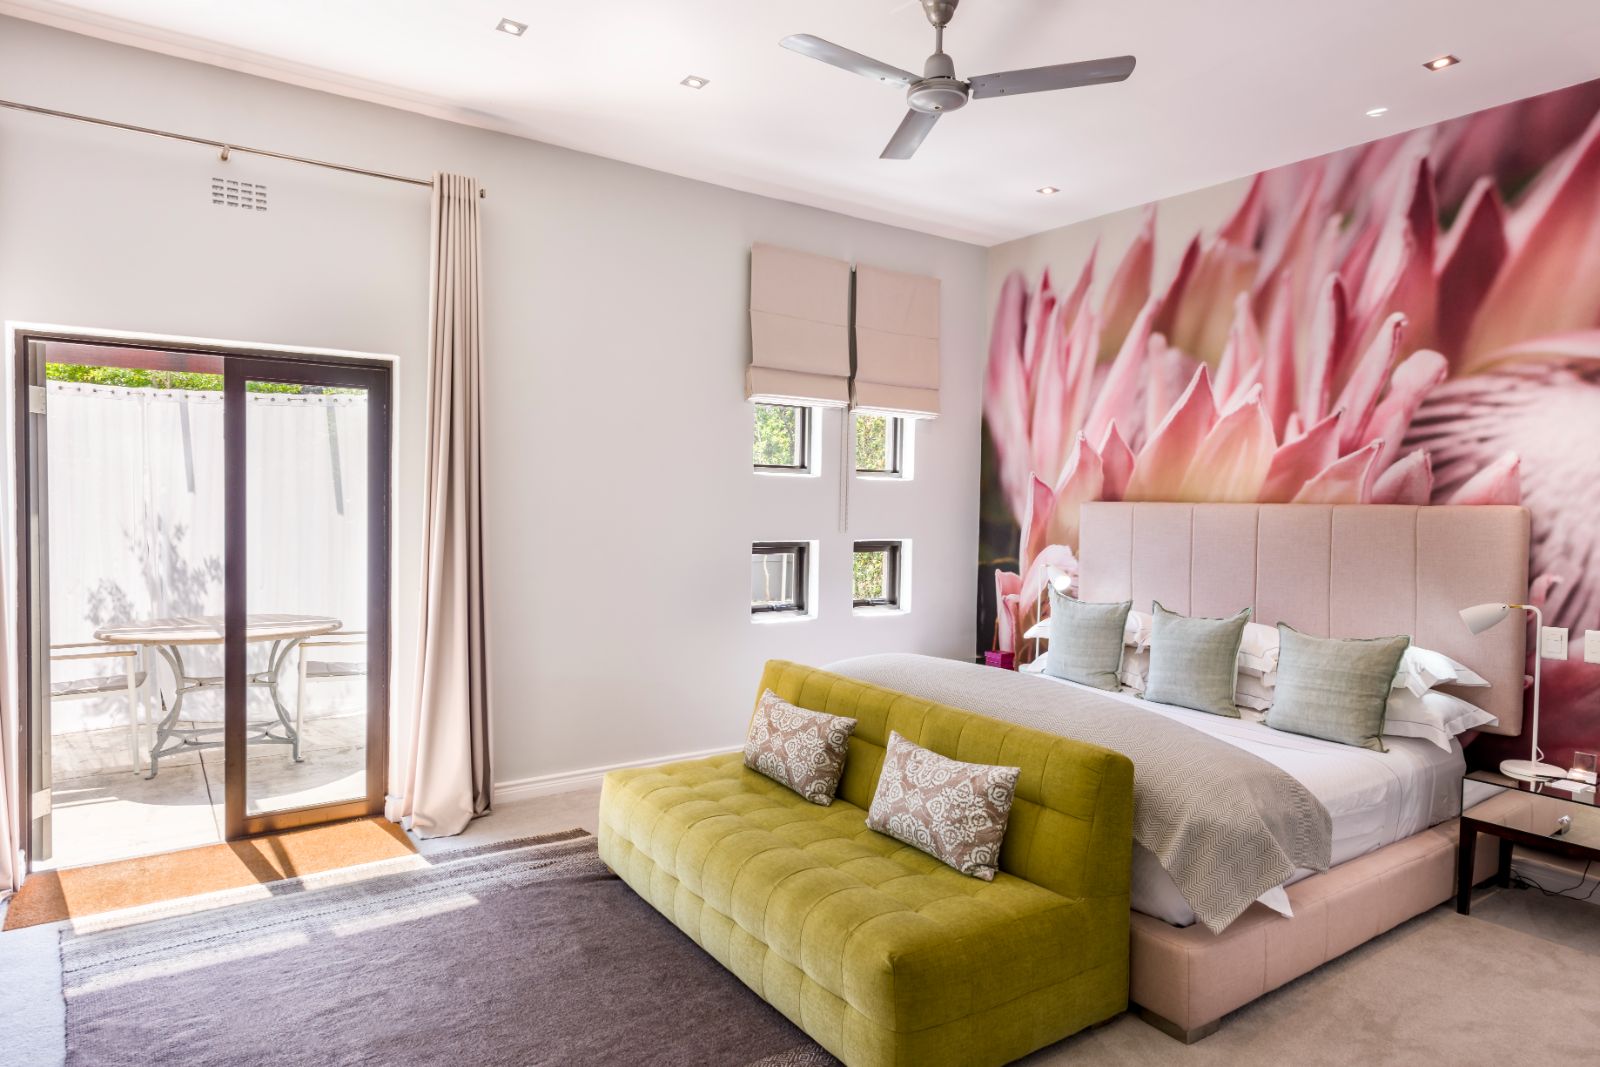 Superior room with pink aesthetic and private outside courtyard at luxury hotel Kensington Place in Cape Town South Africa